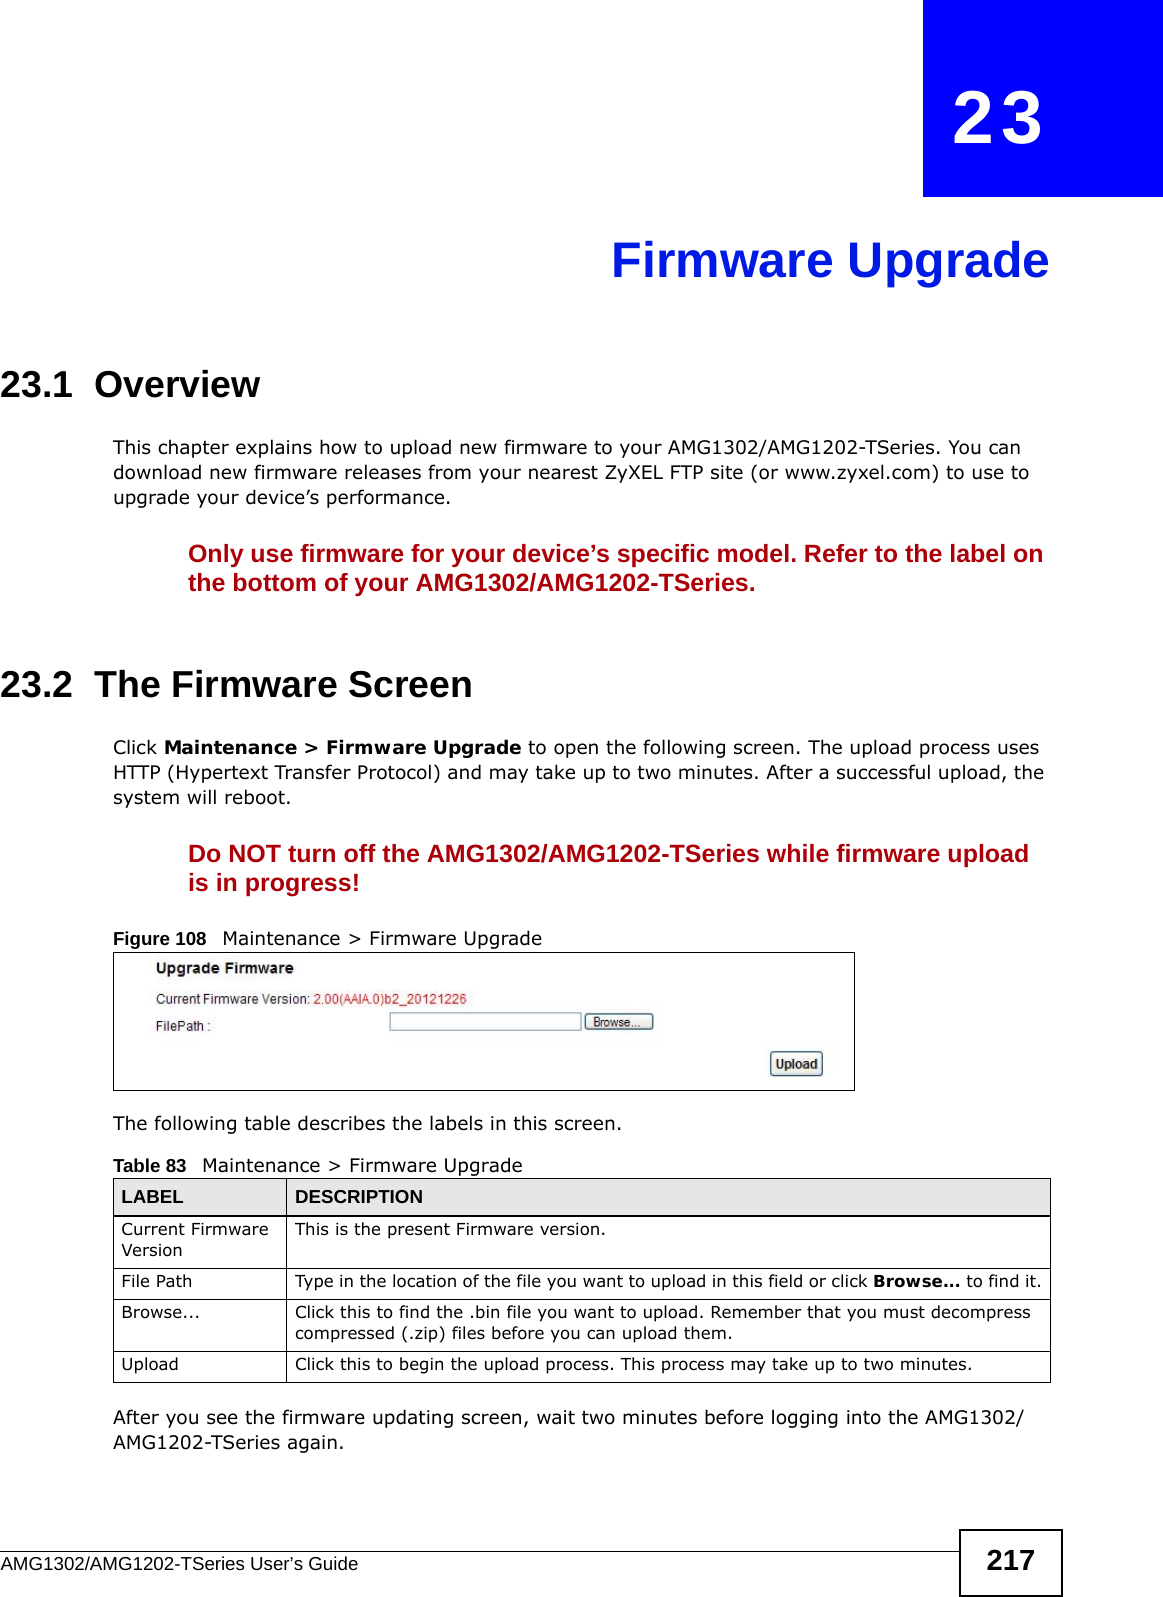 AMG1302/AMG1202-TSeries User’s Guide 217CHAPTER   23Firmware Upgrade23.1  OverviewThis chapter explains how to upload new firmware to your AMG1302/AMG1202-TSeries. You can download new firmware releases from your nearest ZyXEL FTP site (or www.zyxel.com) to use to upgrade your device’s performance.Only use firmware for your device’s specific model. Refer to the label on the bottom of your AMG1302/AMG1202-TSeries.23.2  The Firmware ScreenClick Maintenance &gt; Firmware Upgrade to open the following screen. The upload process uses HTTP (Hypertext Transfer Protocol) and may take up to two minutes. After a successful upload, the system will reboot. Do NOT turn off the AMG1302/AMG1202-TSeries while firmware upload is in progress!Figure 108   Maintenance &gt; Firmware UpgradeThe following table describes the labels in this screen. After you see the firmware updating screen, wait two minutes before logging into the AMG1302/AMG1202-TSeries again. Table 83   Maintenance &gt; Firmware UpgradeLABEL DESCRIPTIONCurrent Firmware VersionThis is the present Firmware version. File Path Type in the location of the file you want to upload in this field or click Browse... to find it.Browse...  Click this to find the .bin file you want to upload. Remember that you must decompress compressed (.zip) files before you can upload them. Upload  Click this to begin the upload process. This process may take up to two minutes.